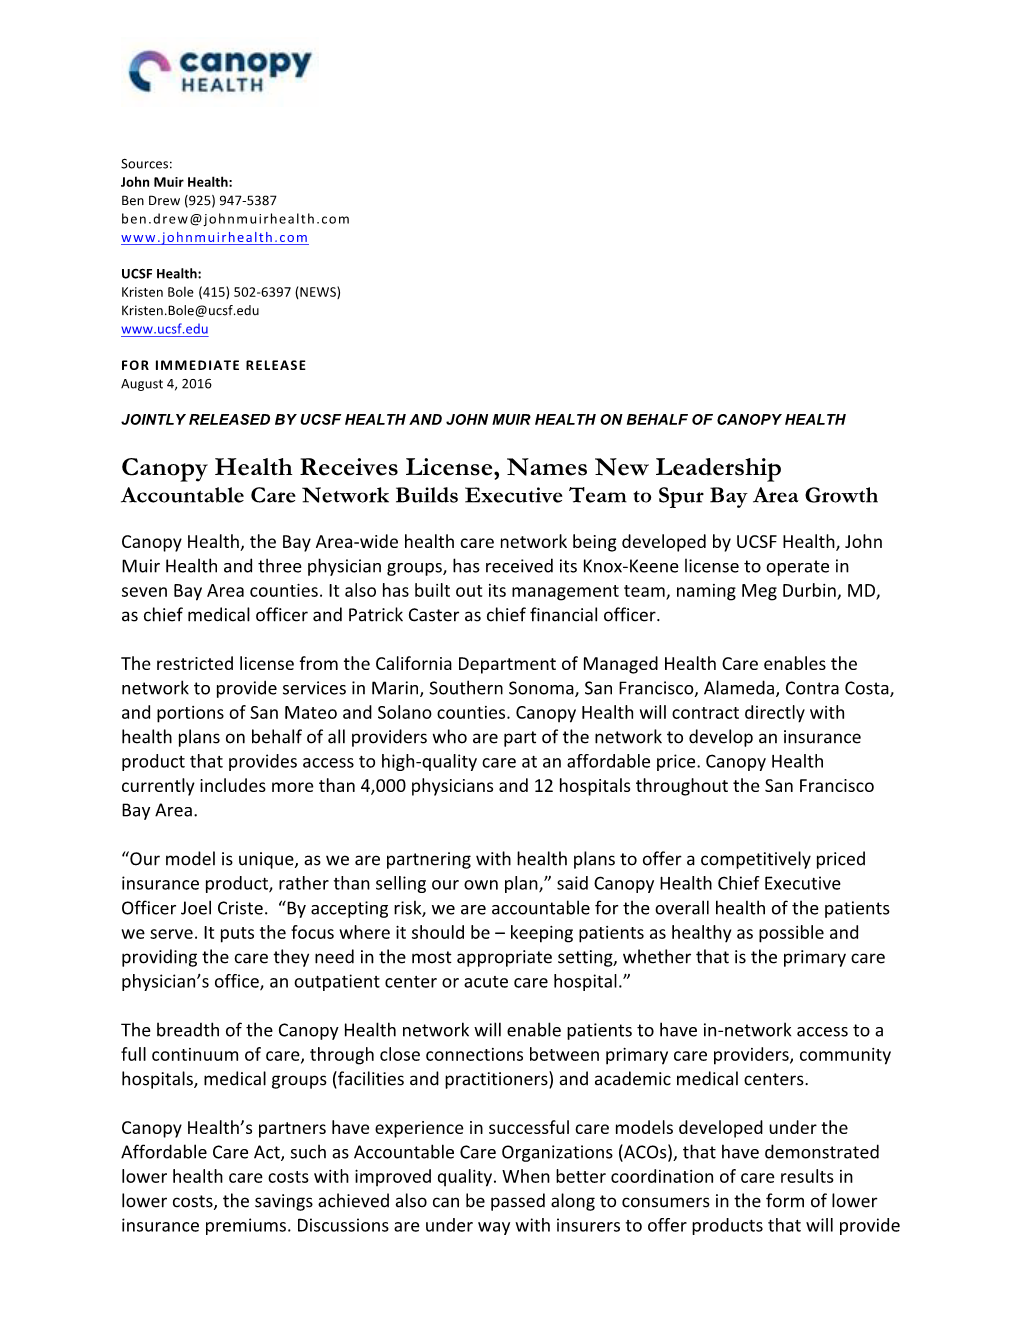 Canopy Health Receives License, Names New Leadership Accountable Care Network Builds Executive Team to Spur Bay Area Growth